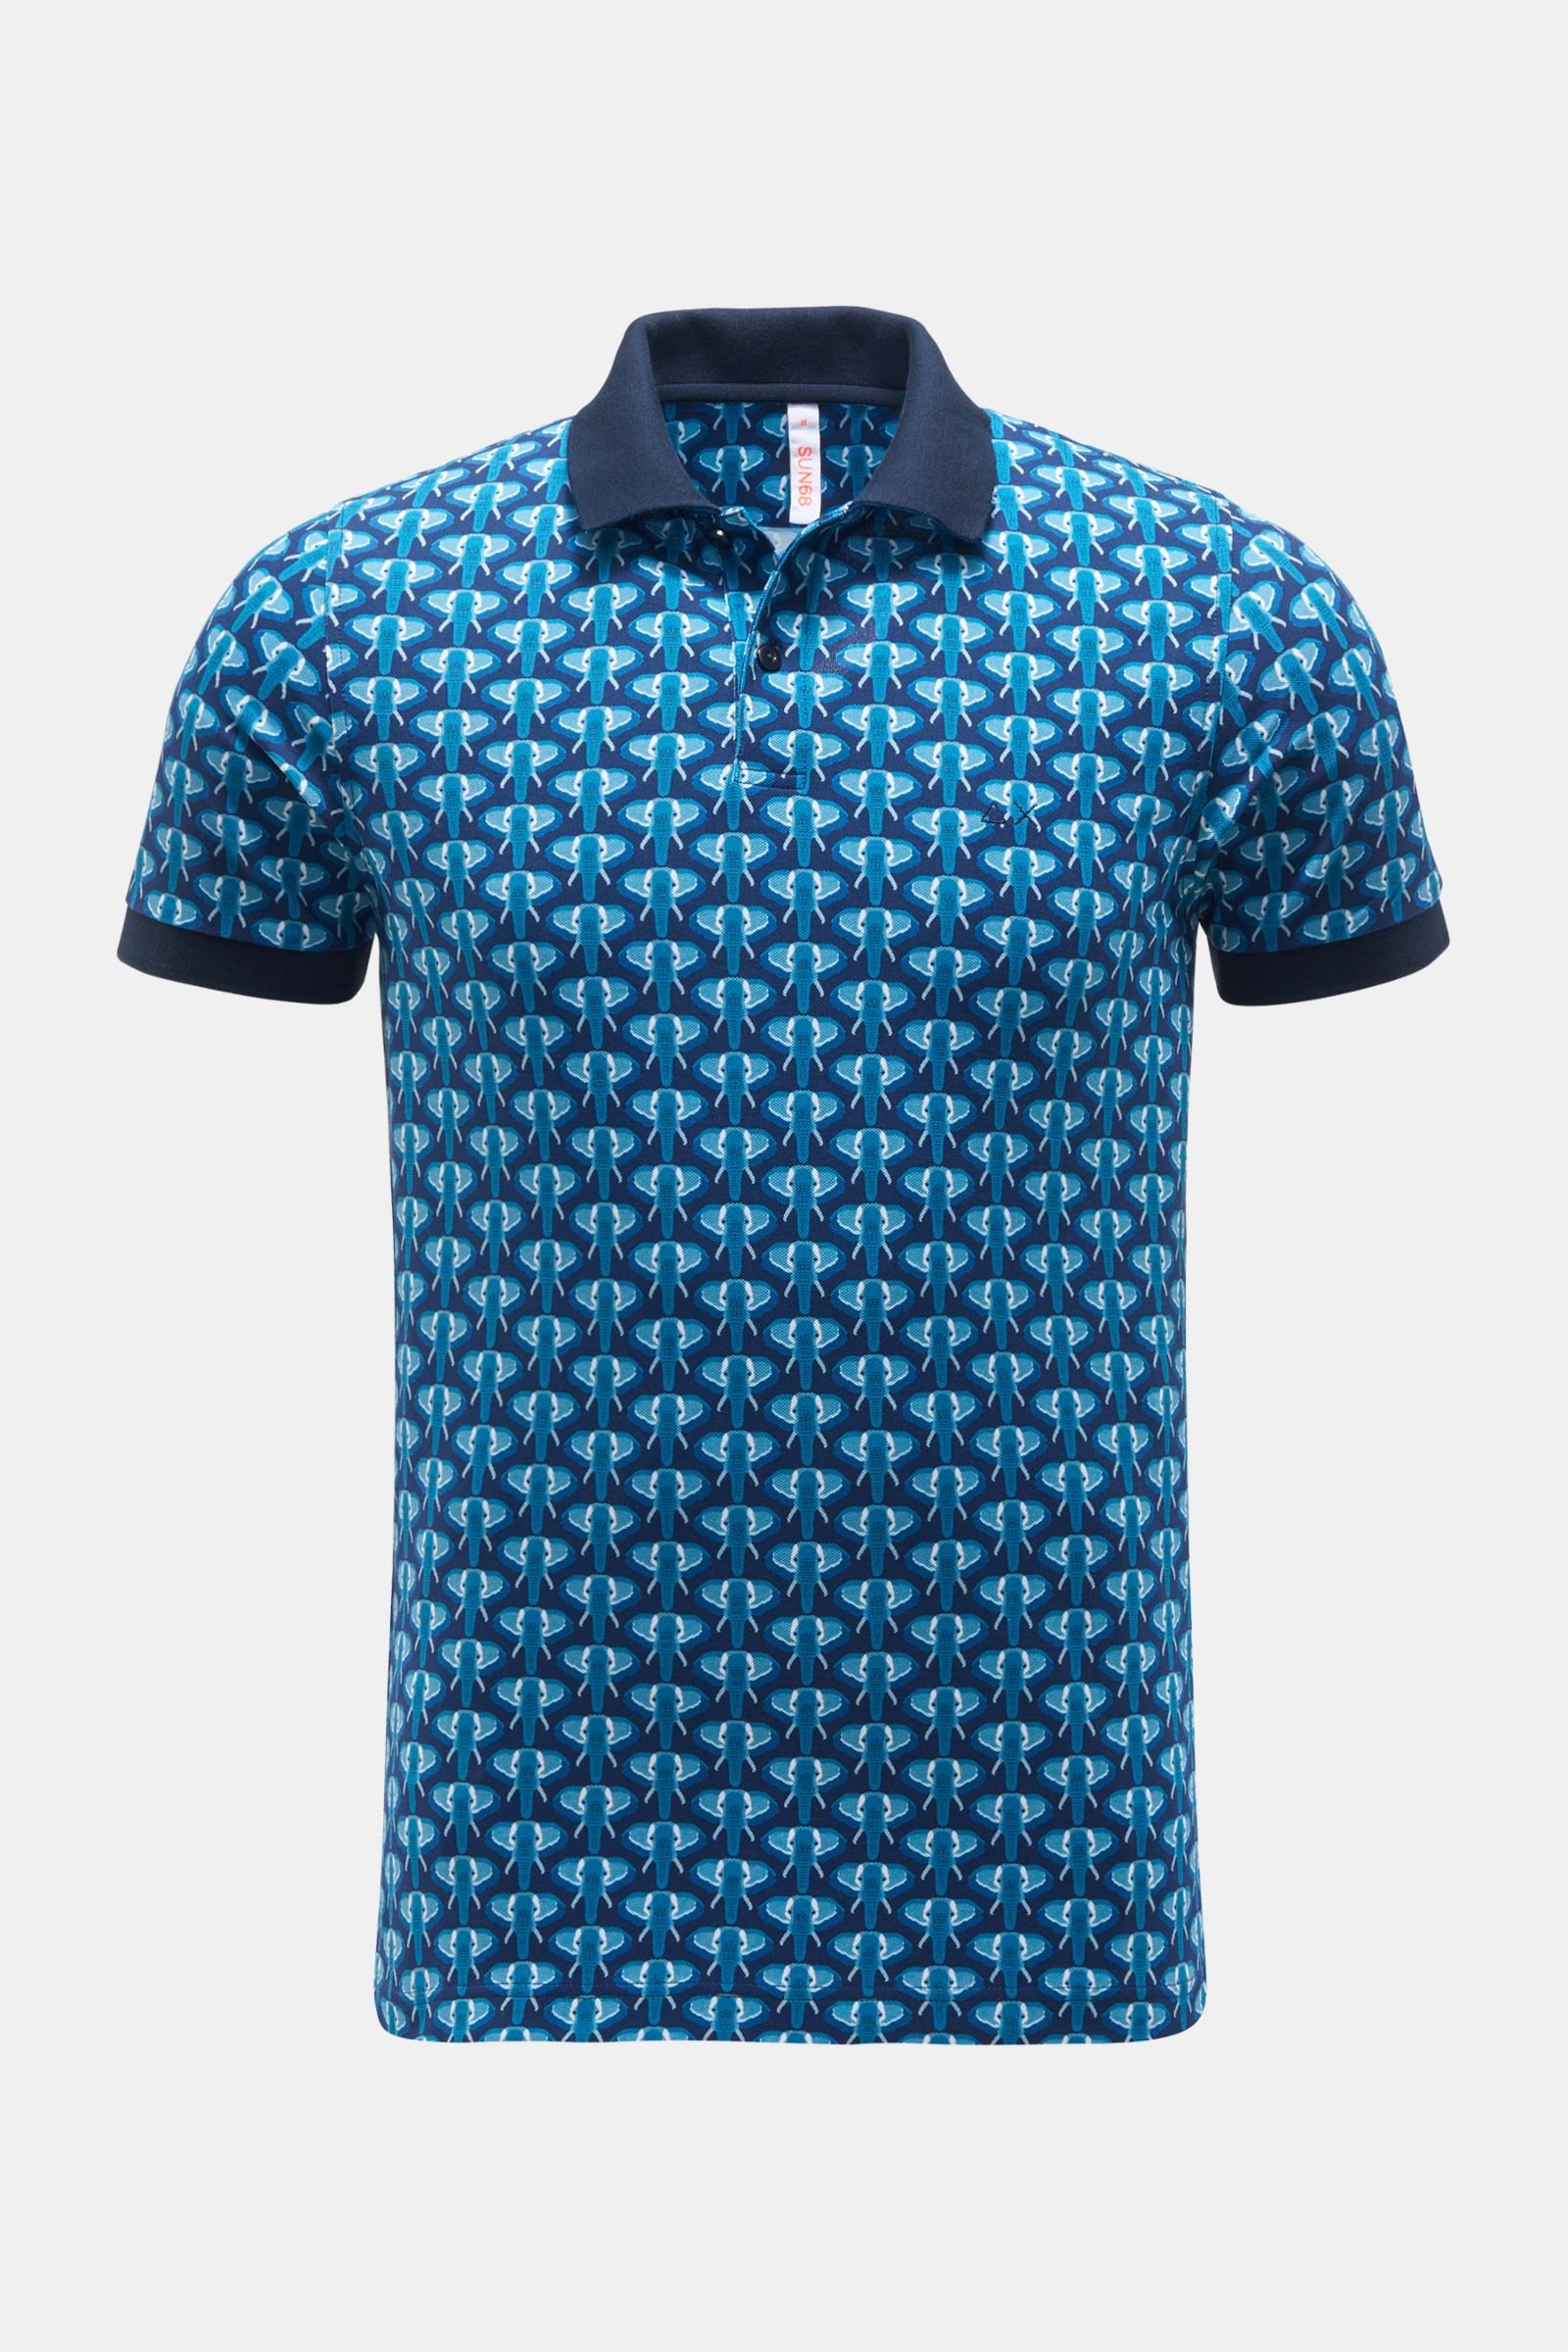 Polo shirt navy/teal patterned